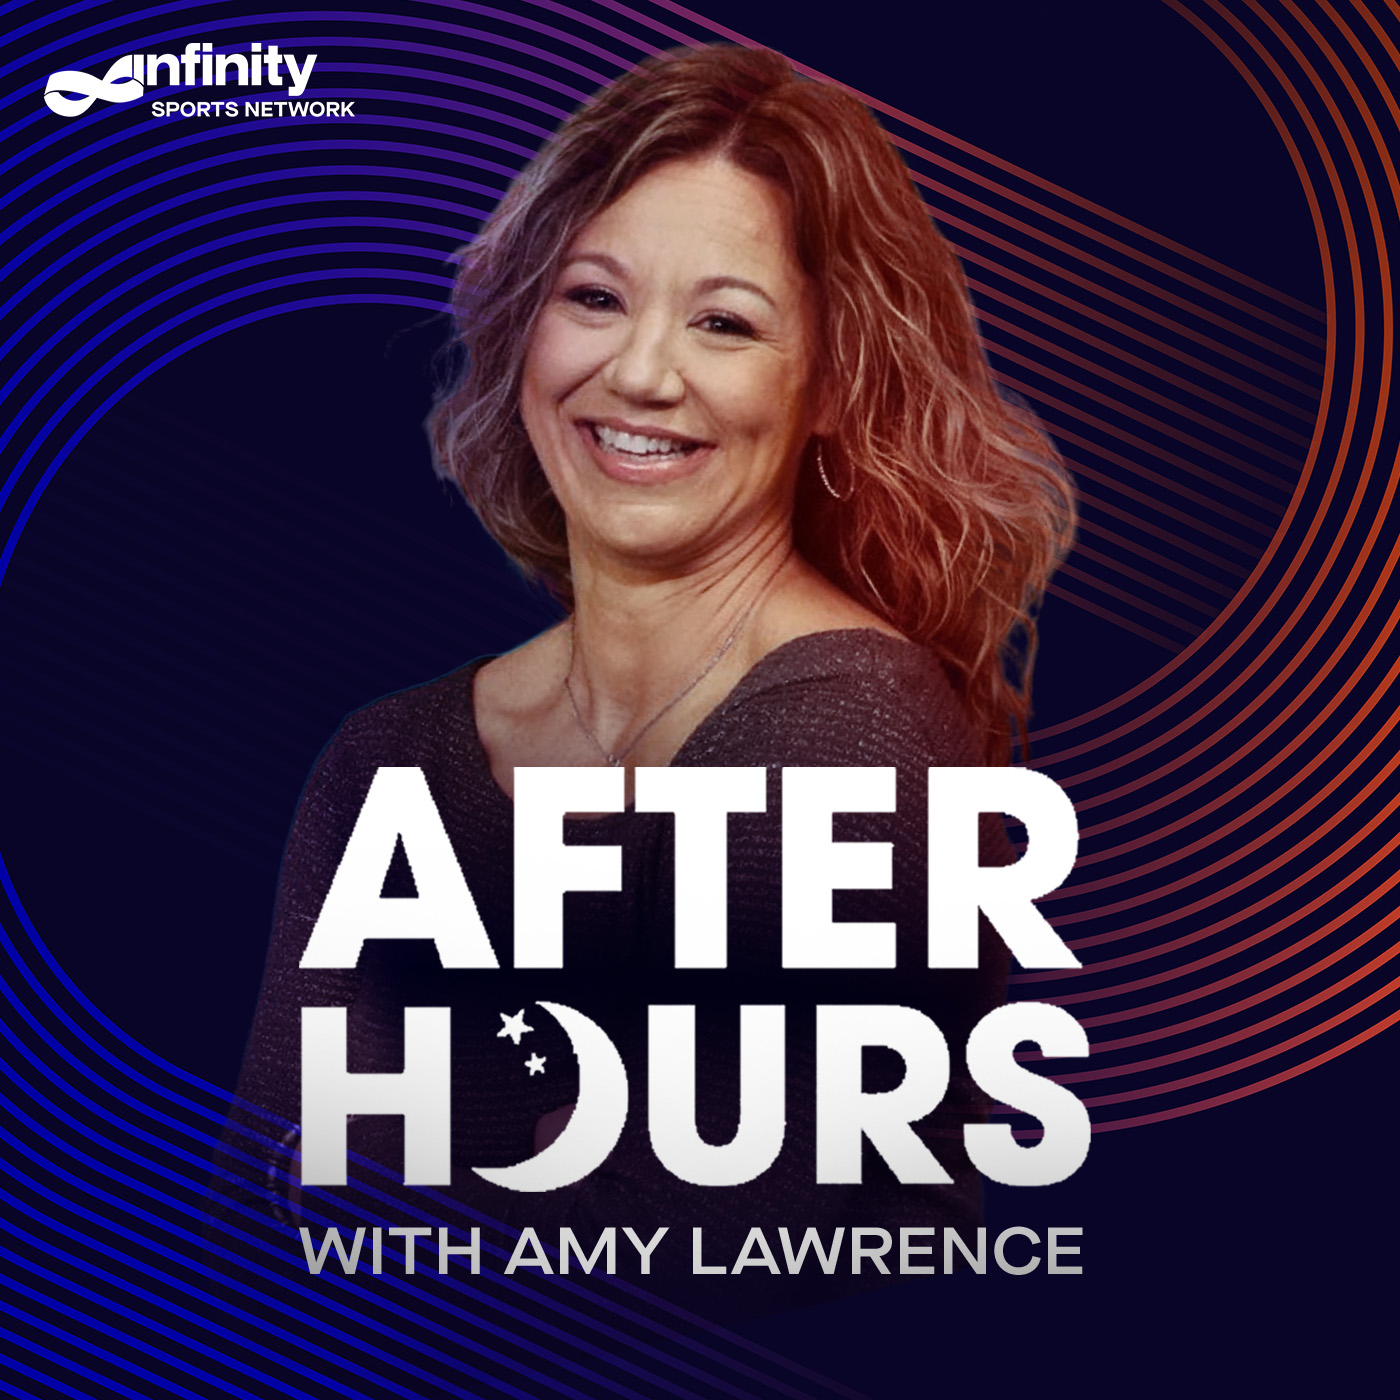 7/28/21 After Hours with Amy Lawrence PODCAST: Hour 2